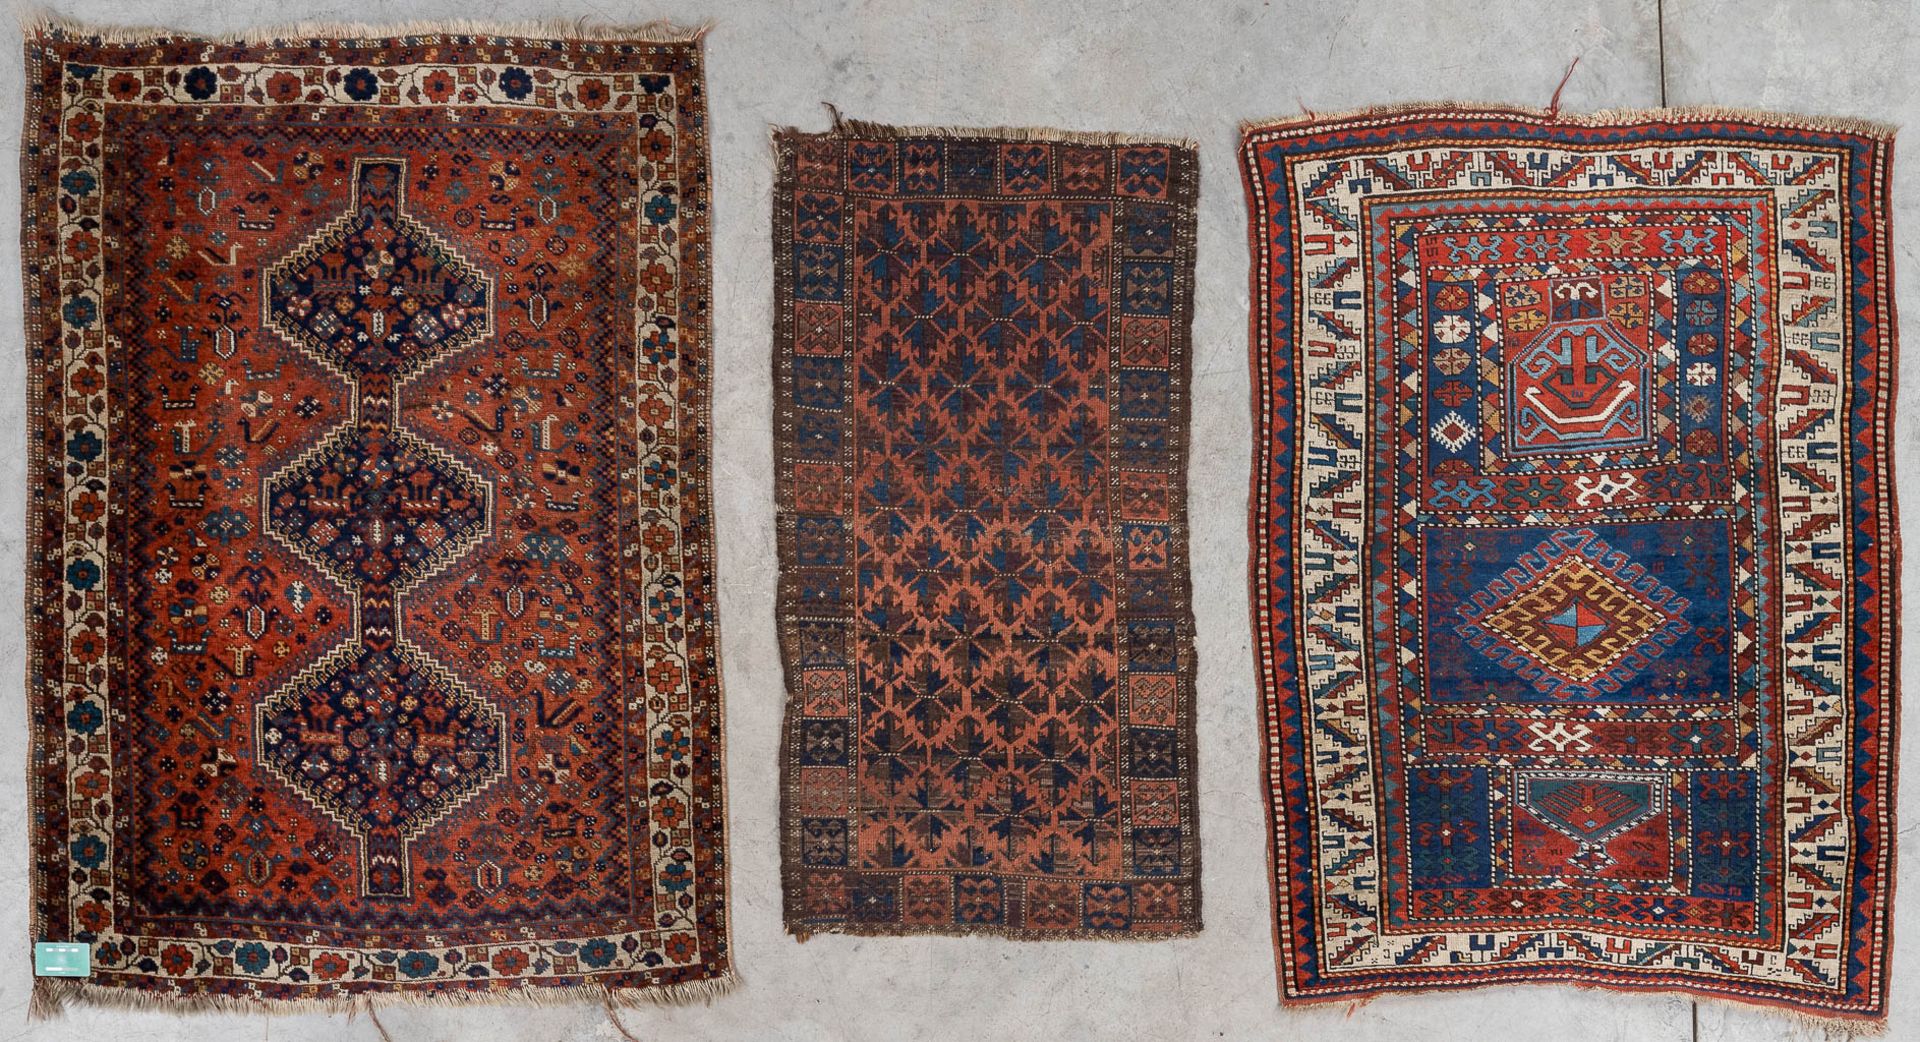 A collection of 3 Oriental hand-made carpets, probably Caucasian. (L: 157 x W: 116 cm) - Image 2 of 11